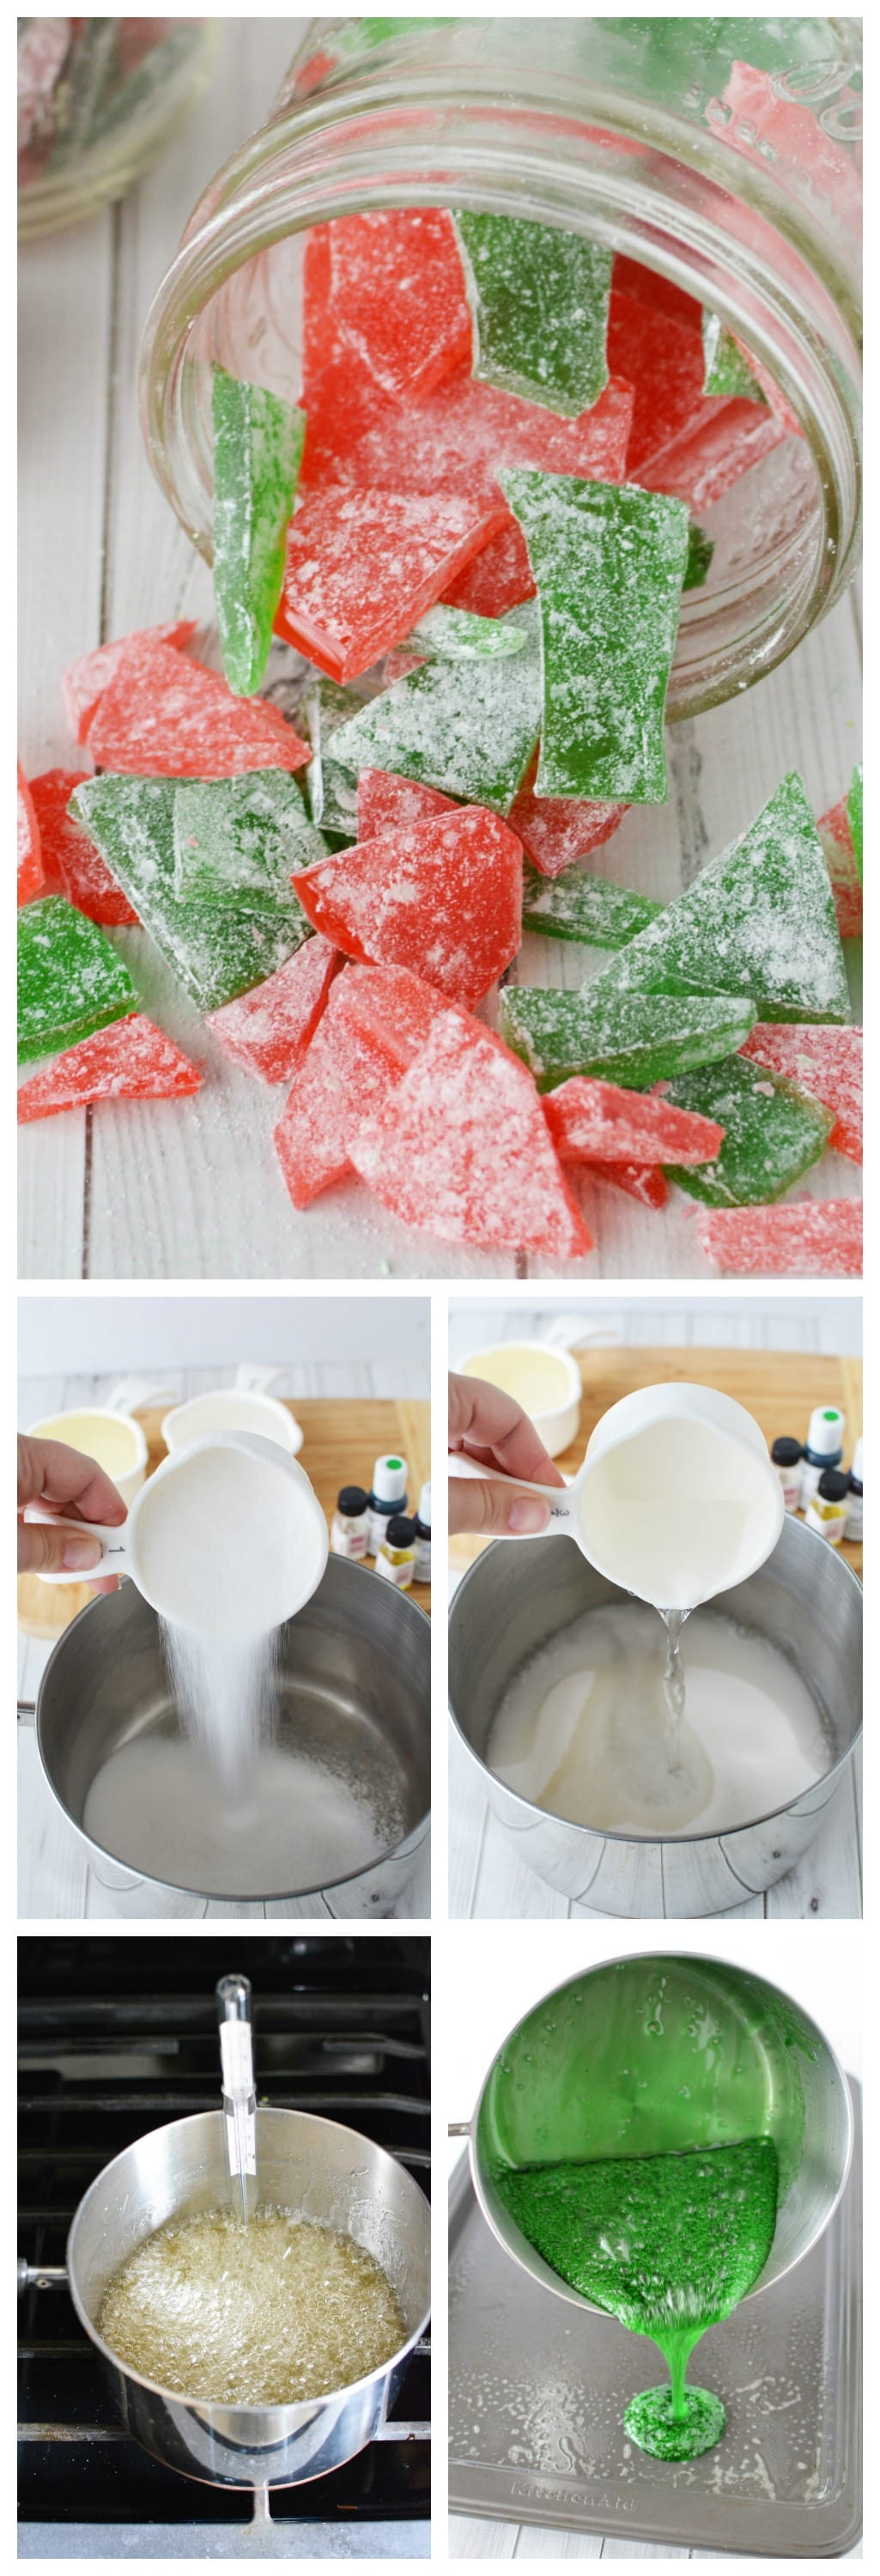 Rock Candy Christmas
 How to Make Rock Candy